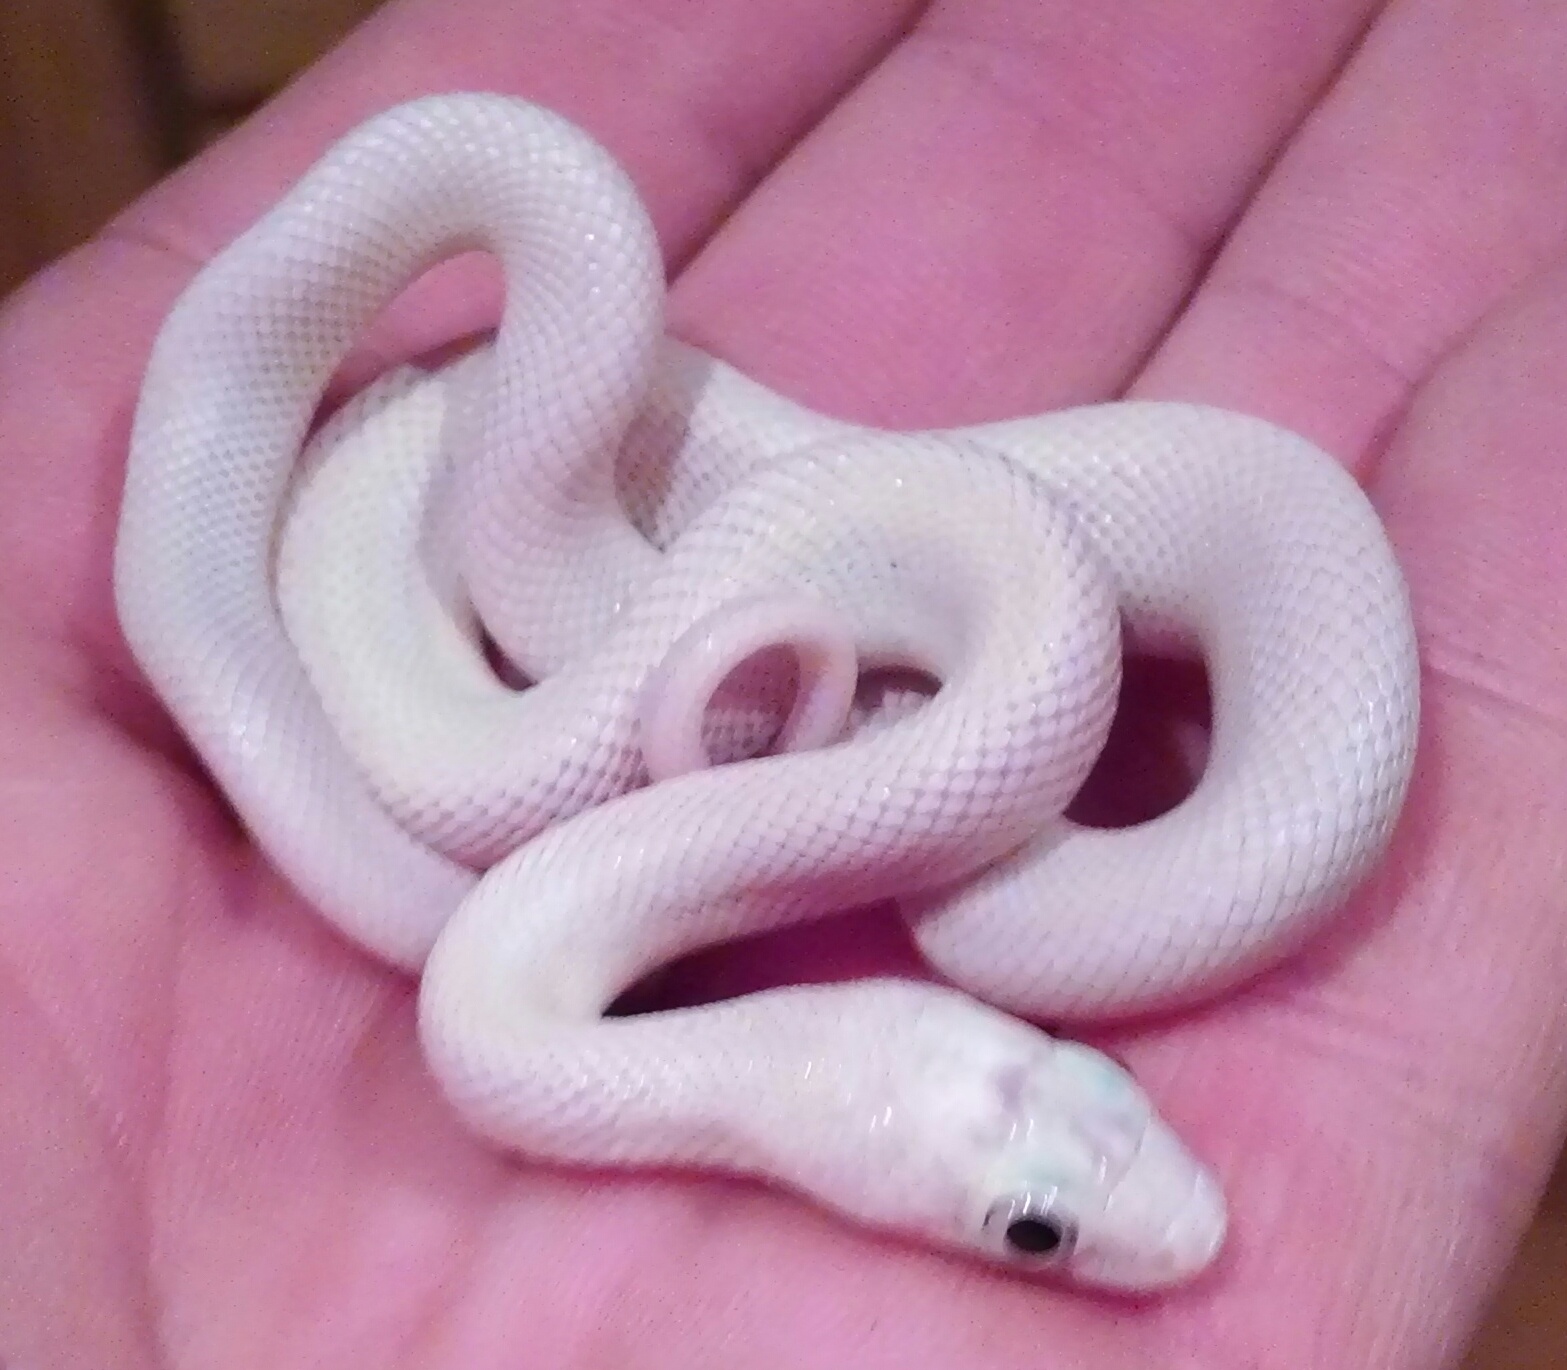 say hello to snowflake my blue eyed leucistic rat snake. few months old, on...